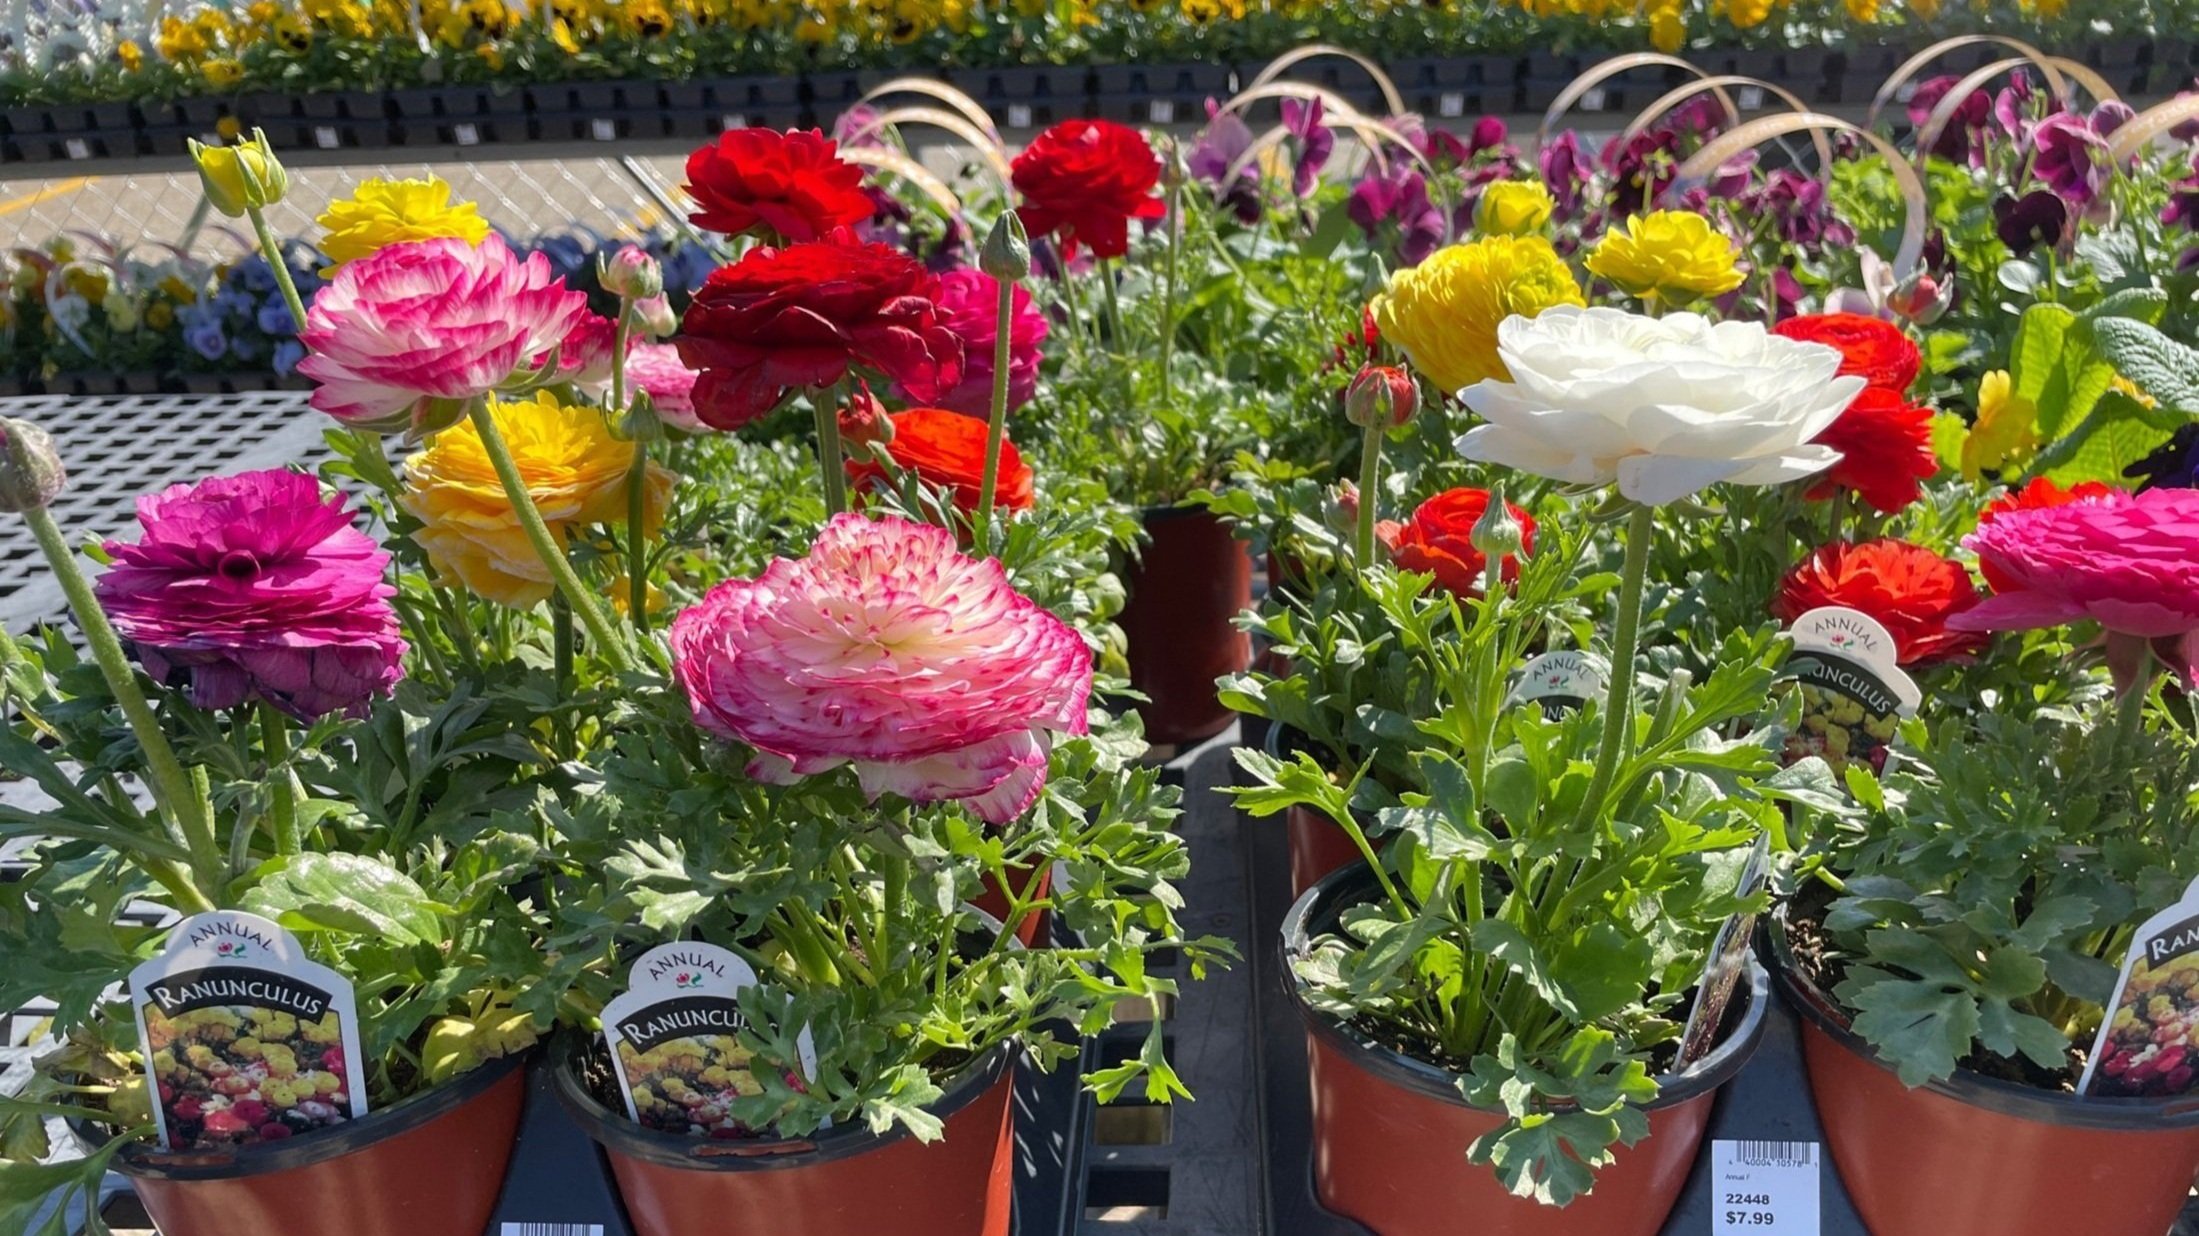  Ranunculus in stock at The Plant Kingdom in Louisville, Kentucky. 